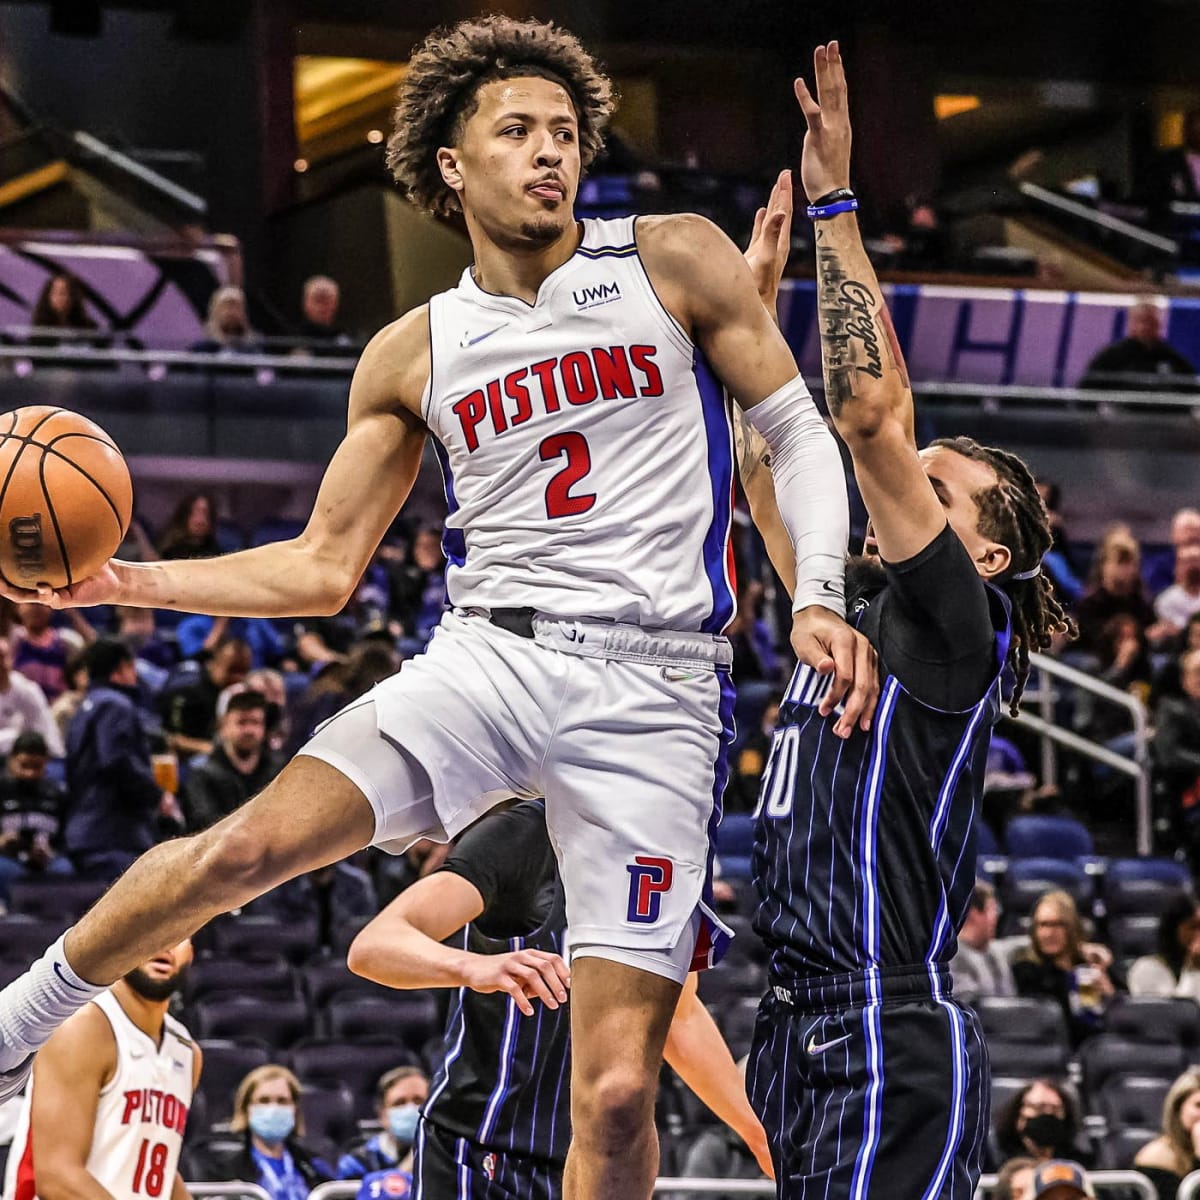 Cade Cunningham's big night doesn't ease 136-112 loss for Detroit Pistons